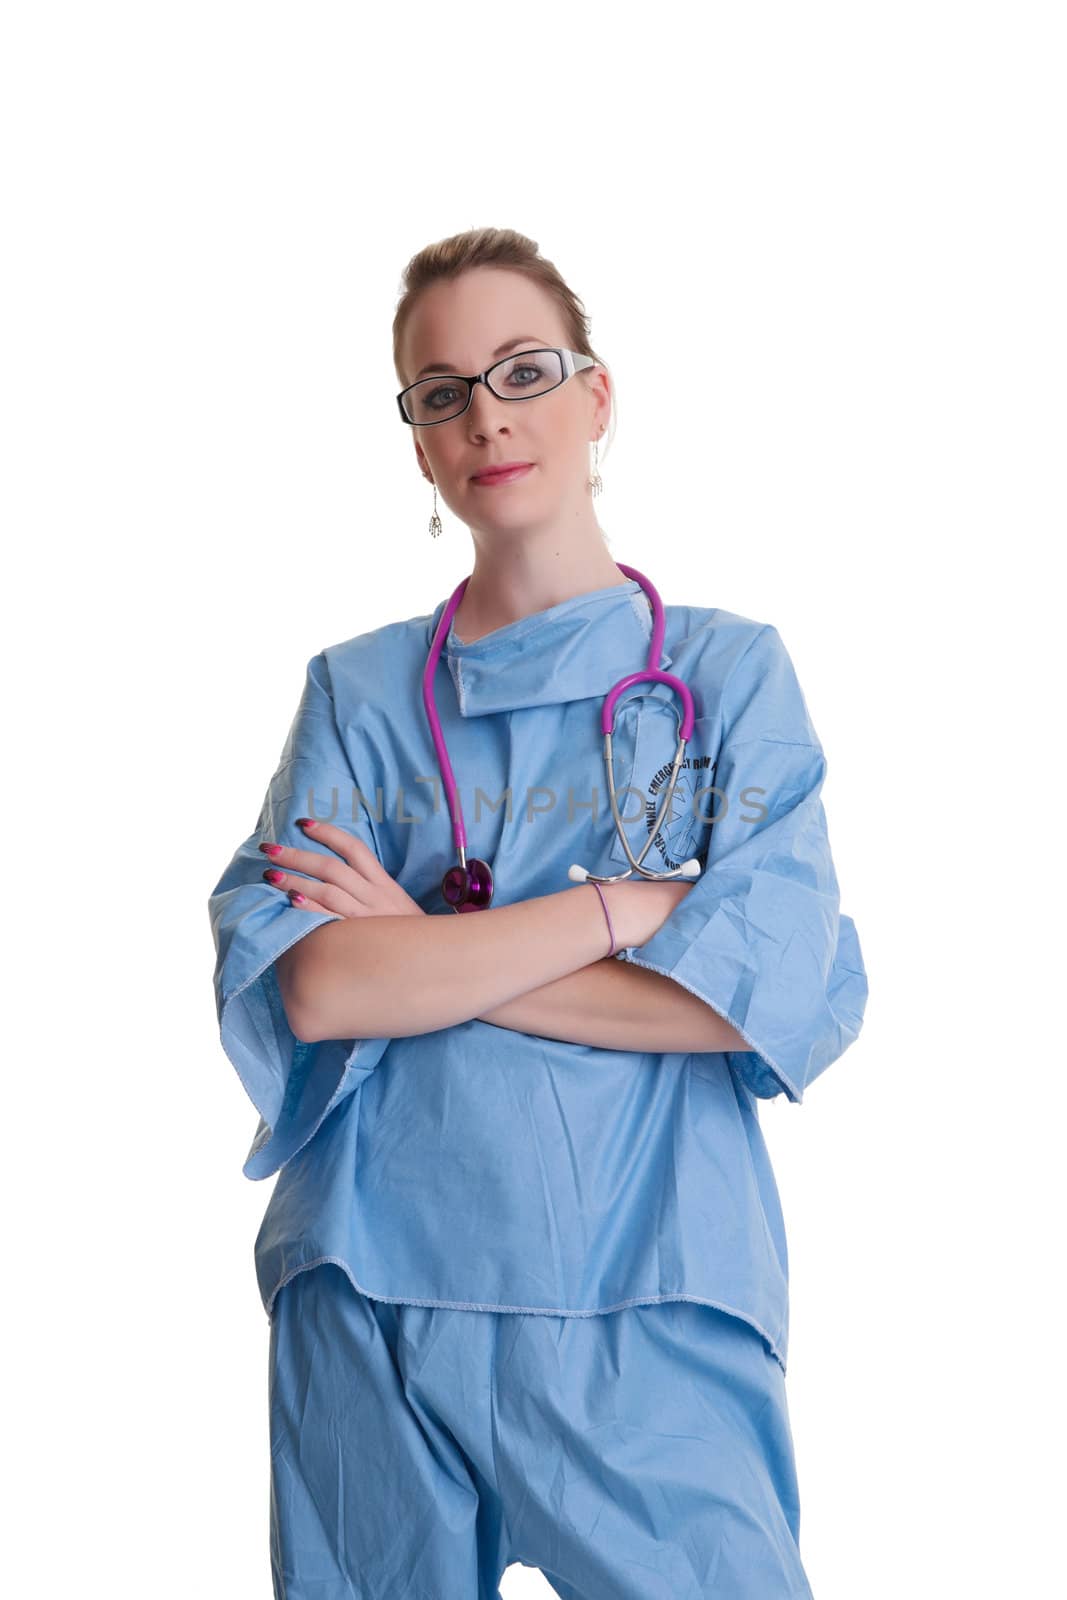 young doctor or nurse in blue scrubs isolated on white background